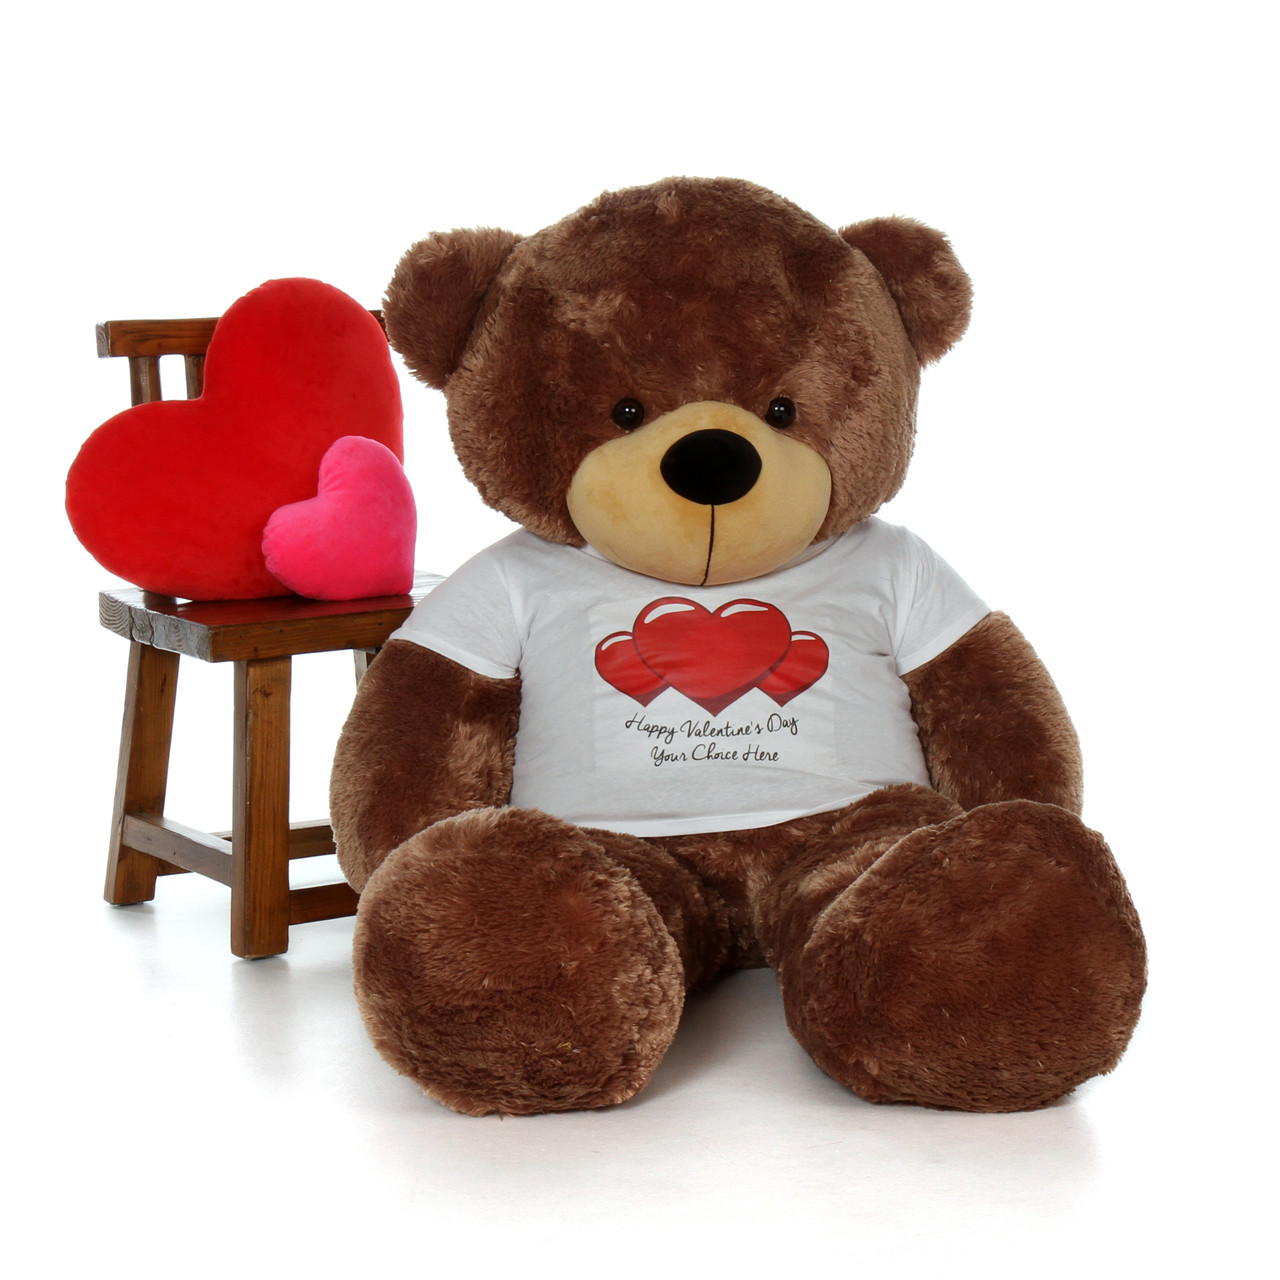 5ft Life Size Teddy Bear wearing customized Happy Valentine’s Day shirt and choose ...